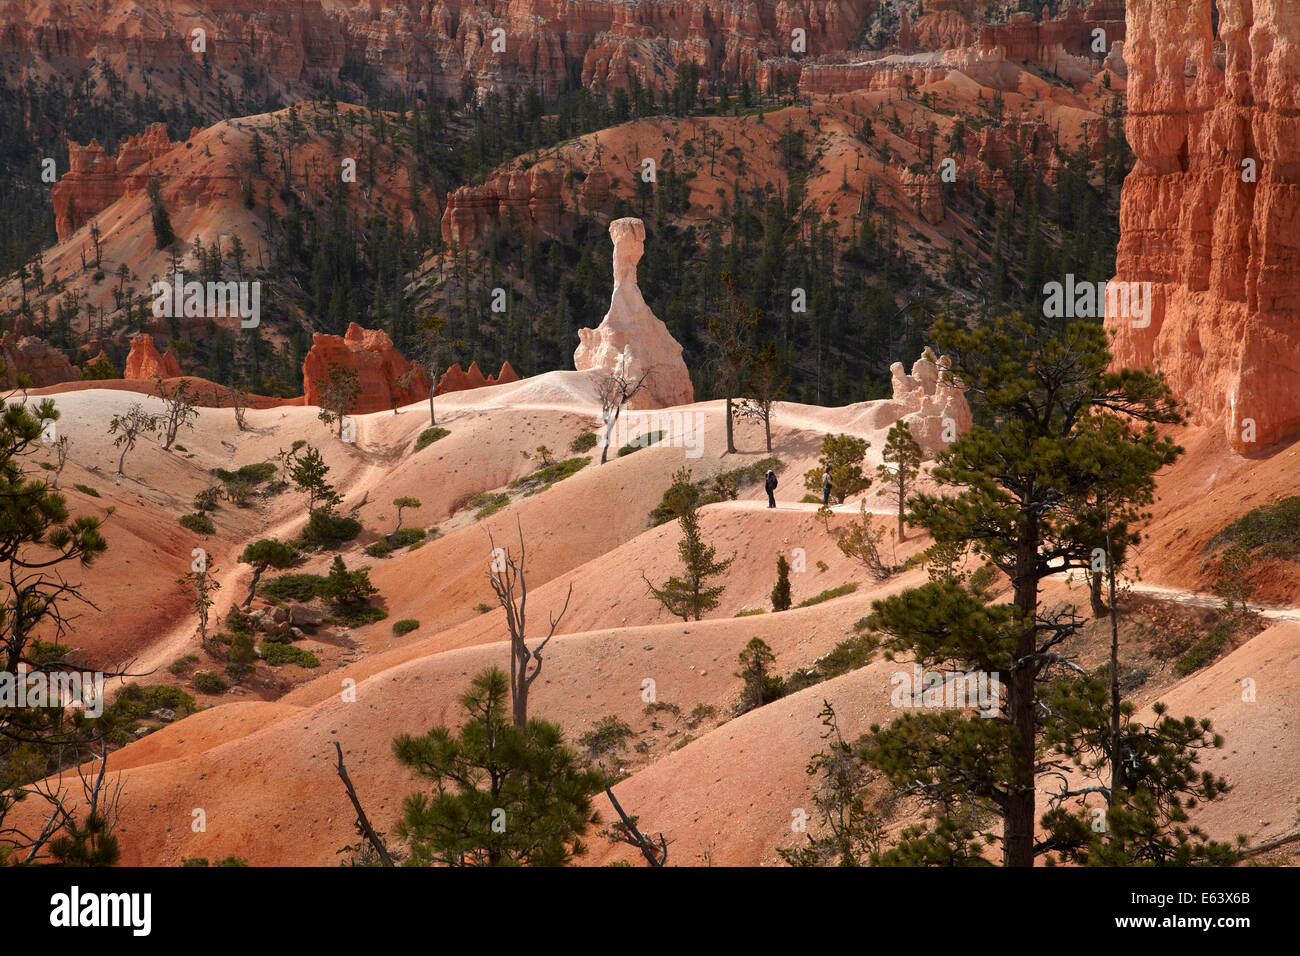 Hikers on Queen's Garden Trail through hoodoos, Bryce Canyon National Park, Utah, USA Stock Photo